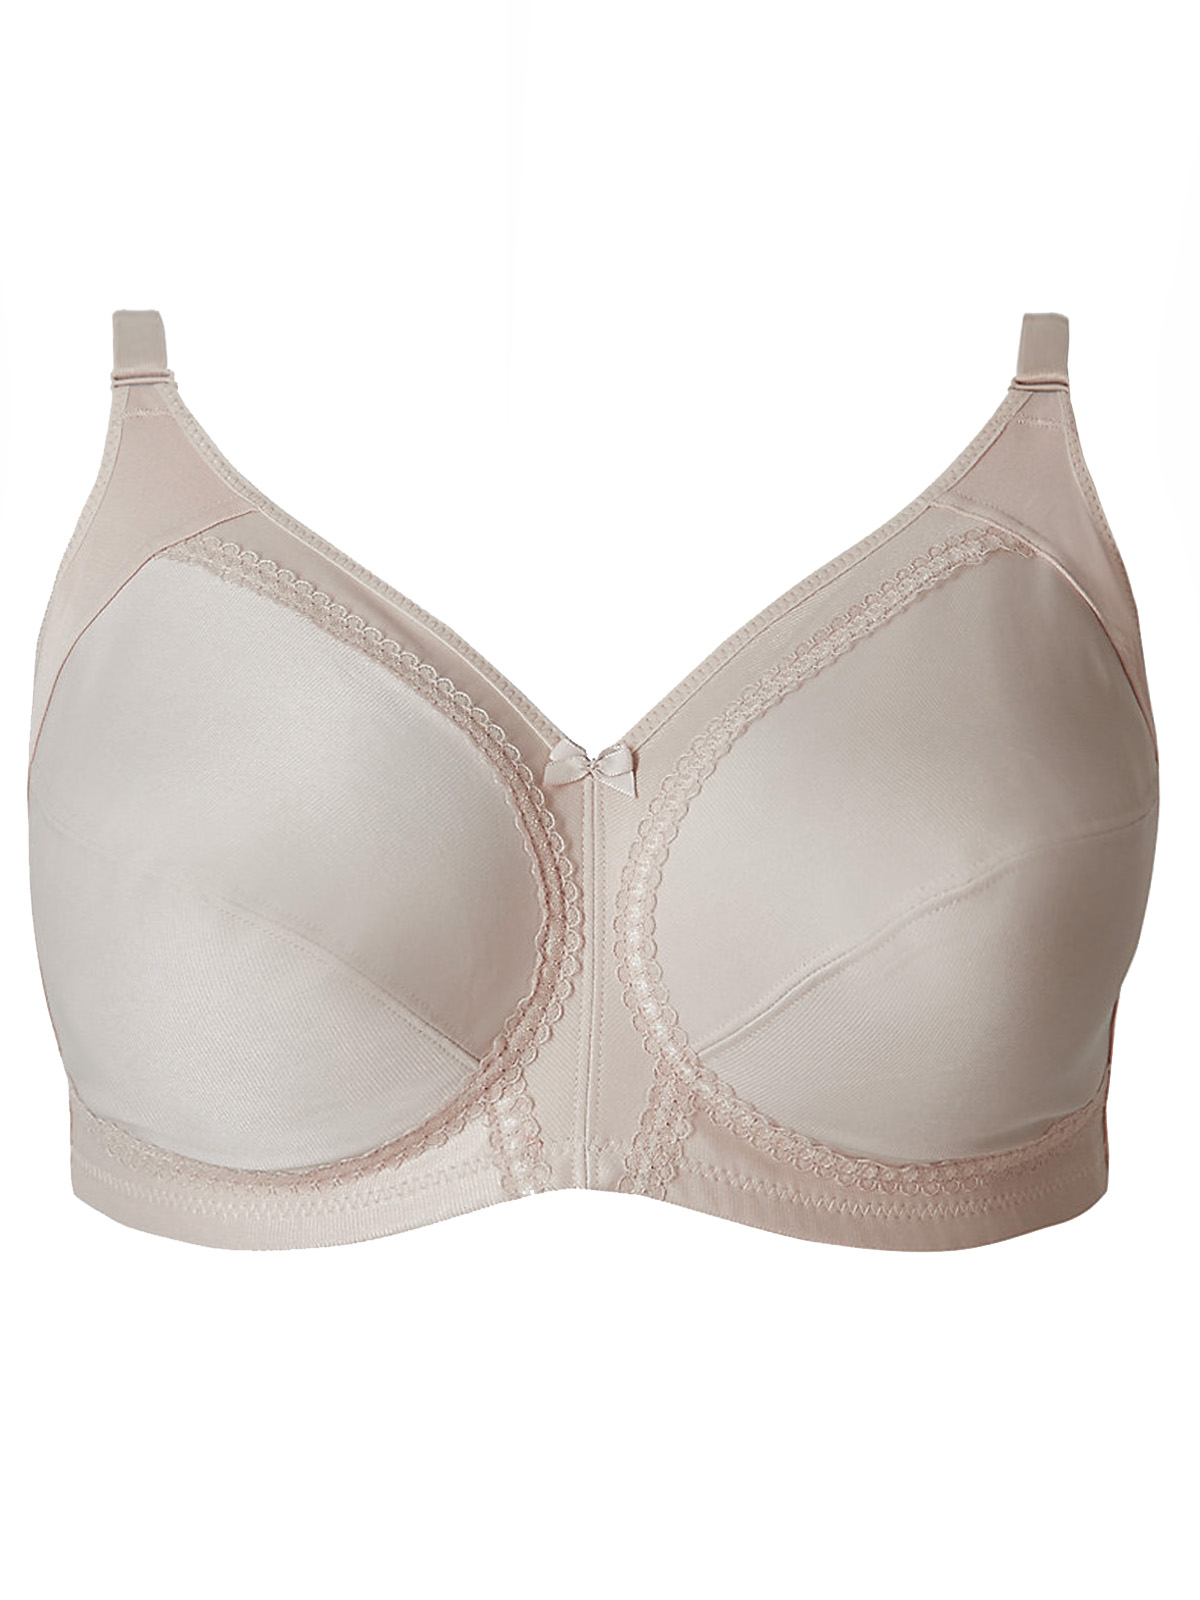 Marks And Spencer Mand5 Almond Total Support Non Wired Full Cup Bra Size 36 To 42 C D E 6798